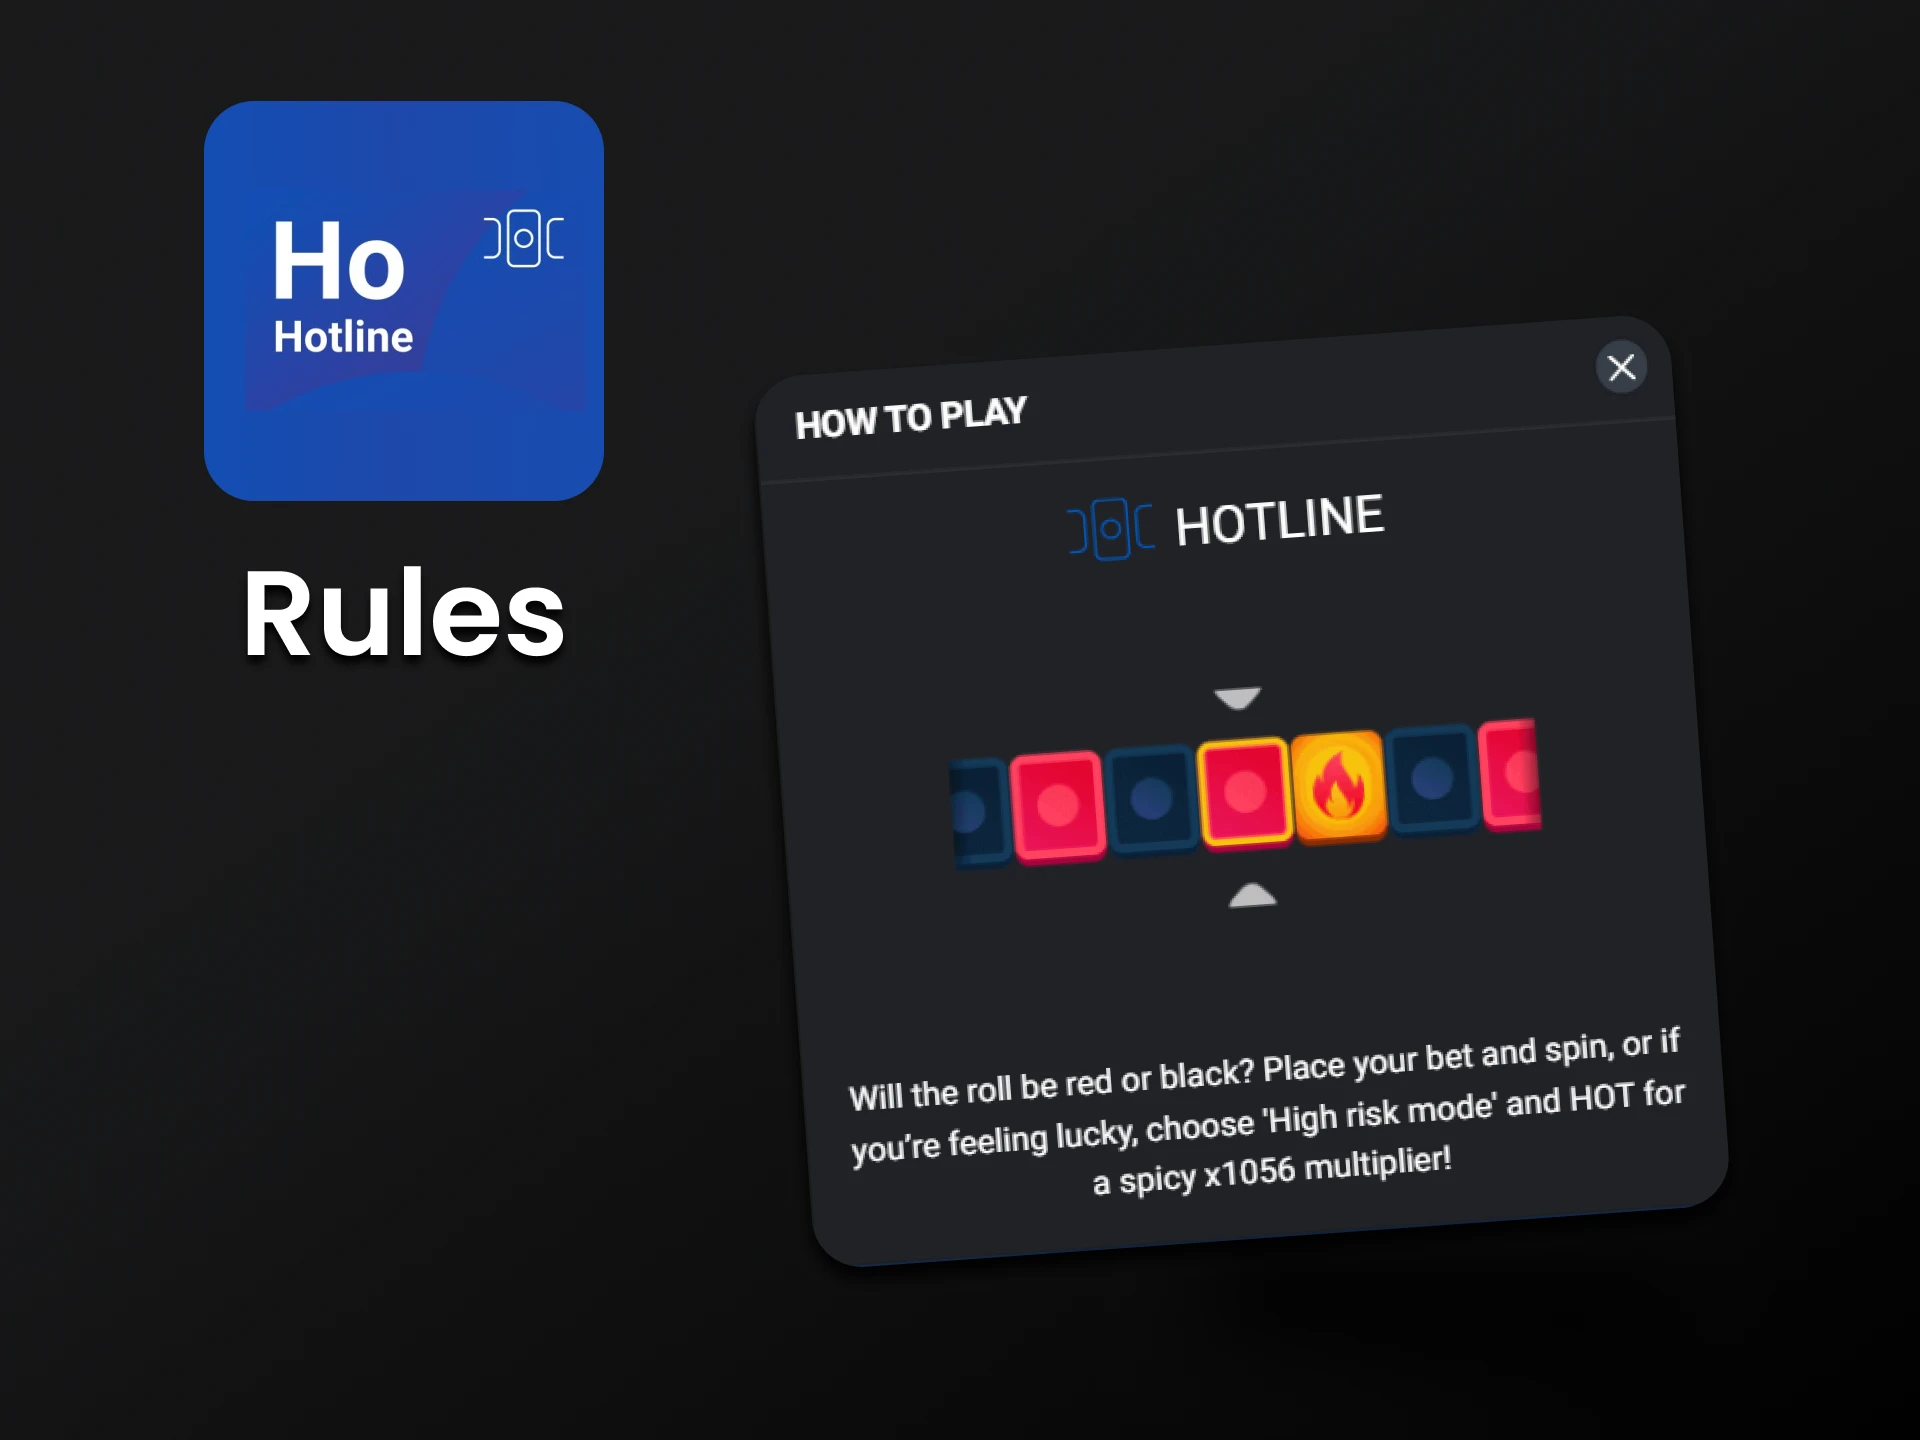 We will tell you about the rules of the Hotline weights.